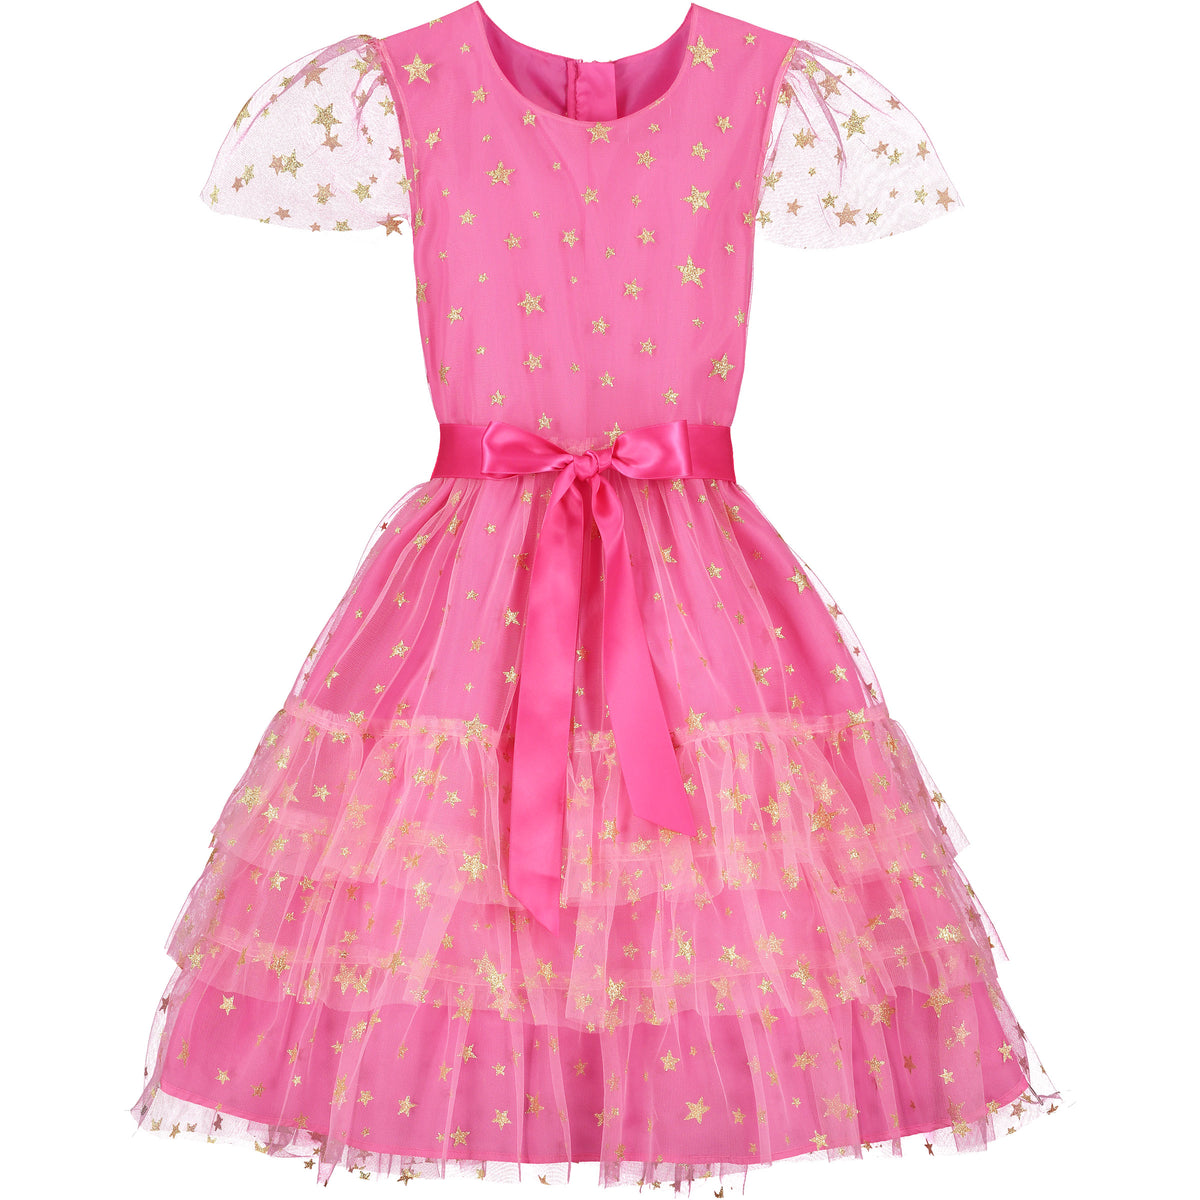 Girls Party Dress Cinderella Candy Pink Star Tulle Frill Luxury | Holly Hastie London